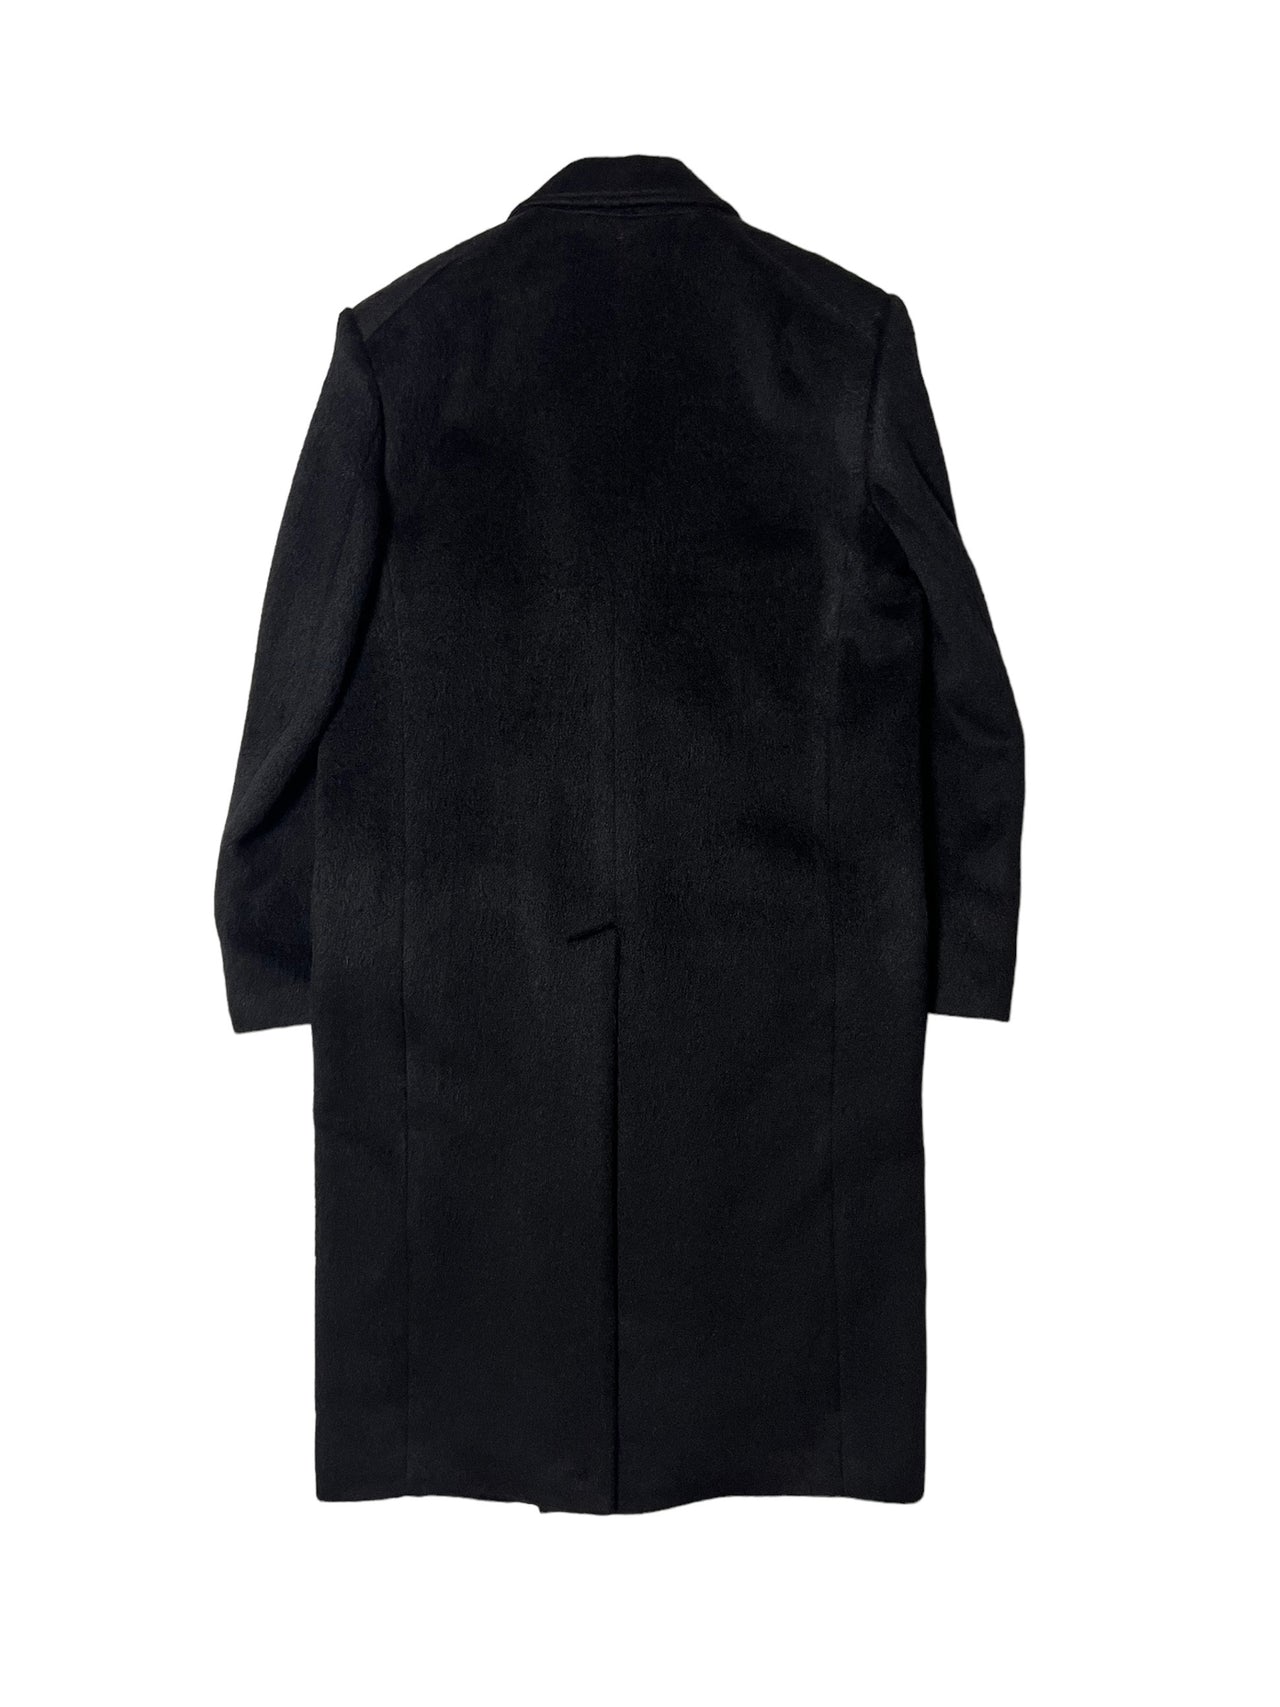 SELVA / DOUBLE BREASTED LONG COAT in BLACK【PREORDER】